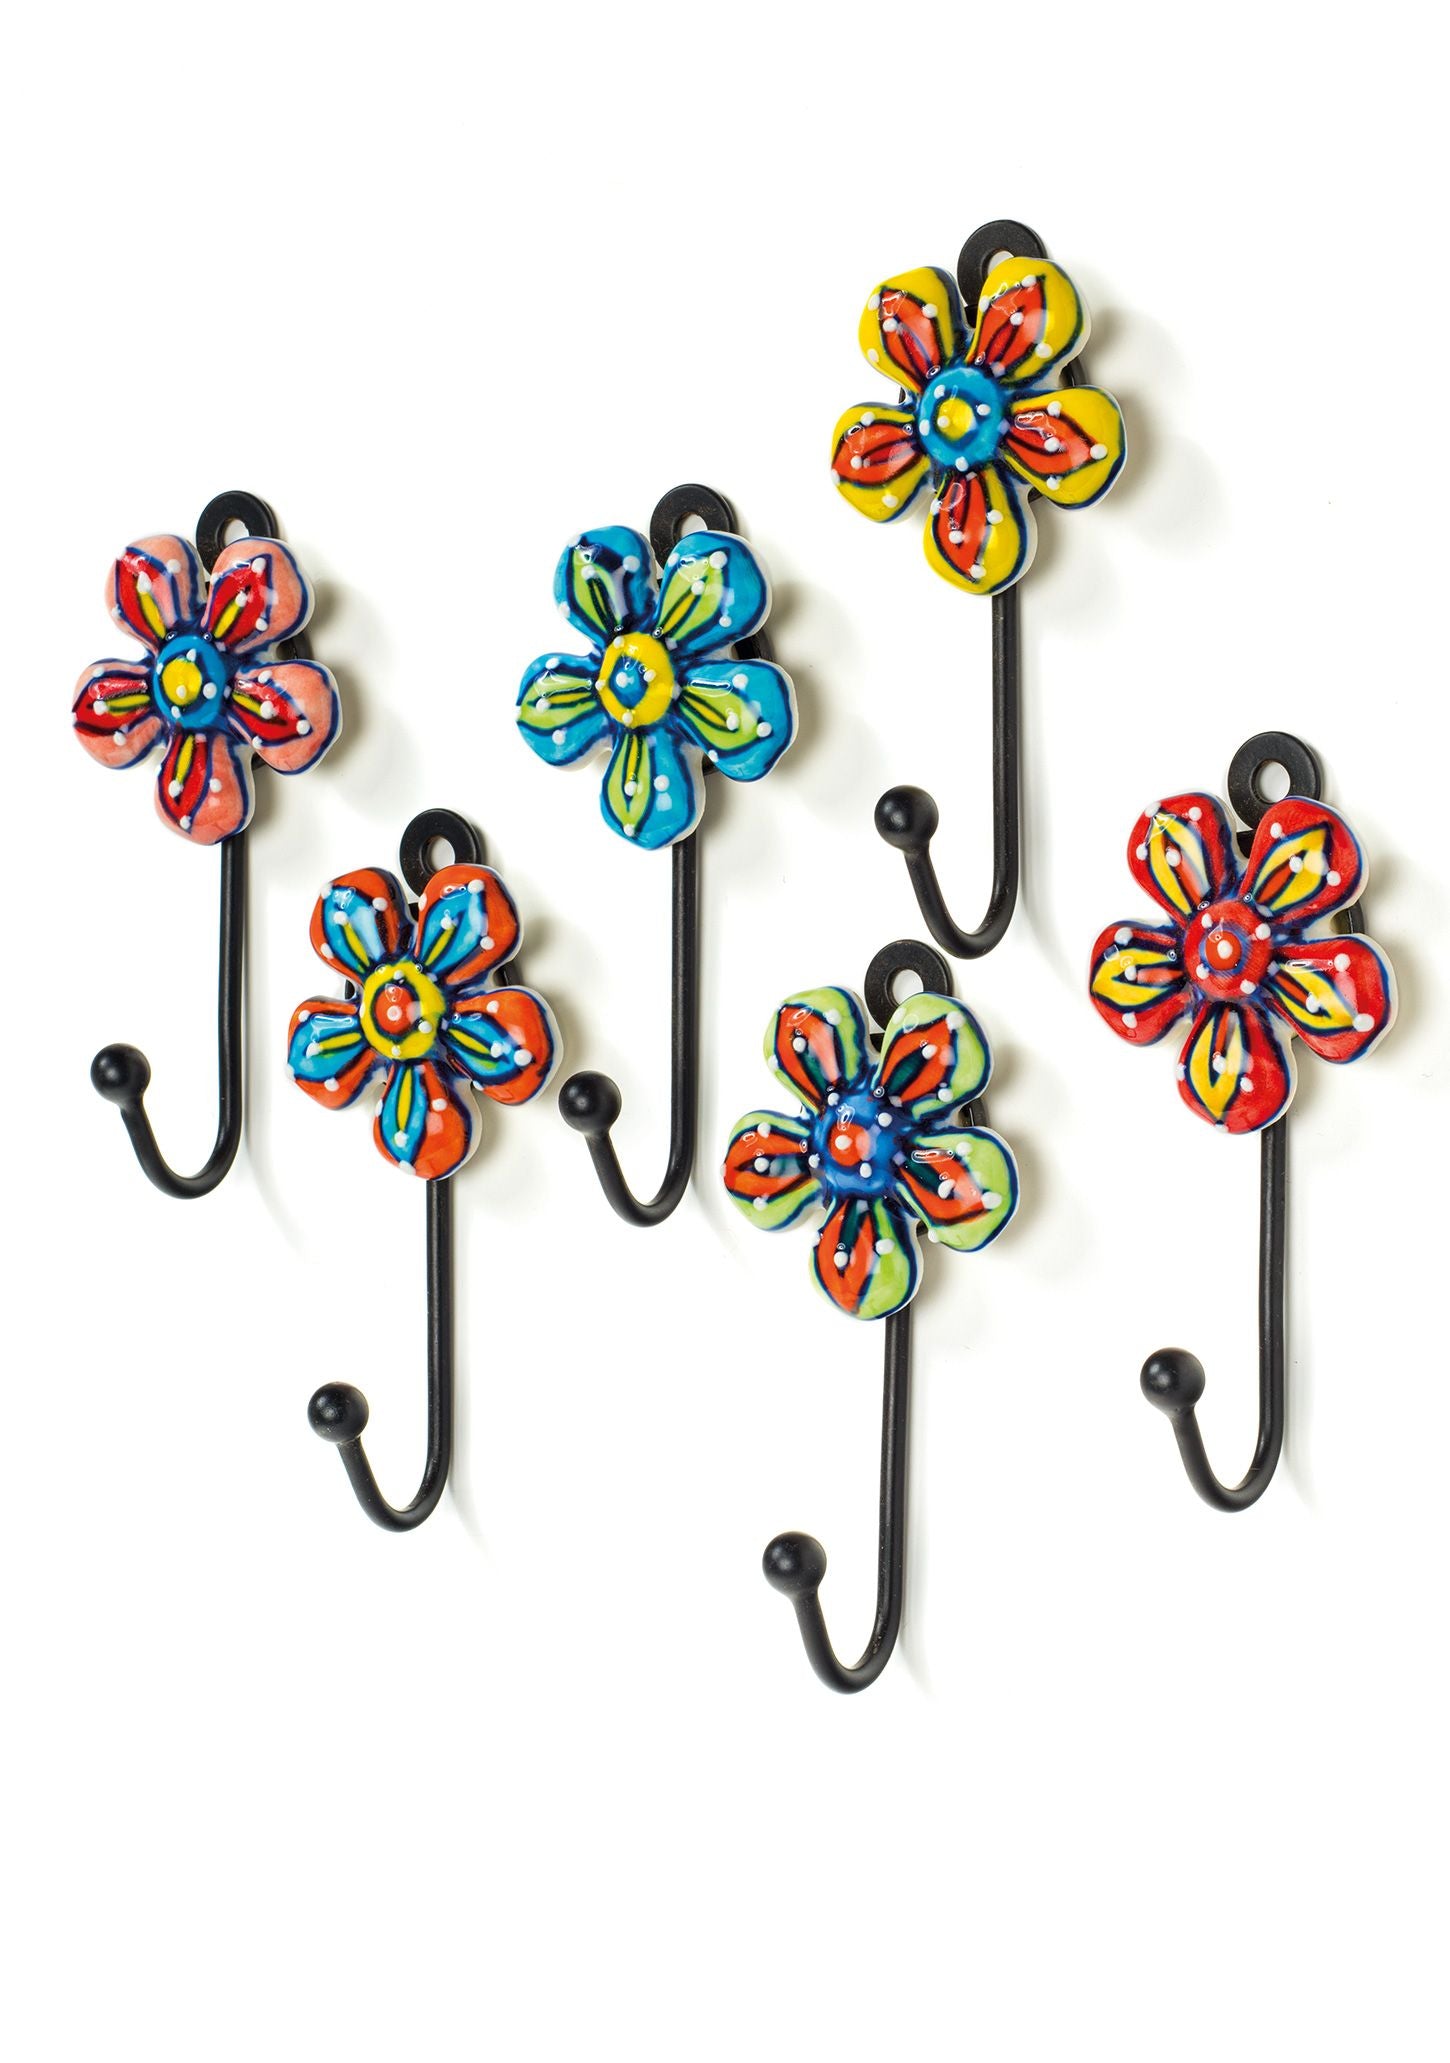 decorative ceramic flower wall hooks handmade by artisan ethical and fair trade gift. Flower hooks in different colors like green, blue, yellow, red, pink and orange